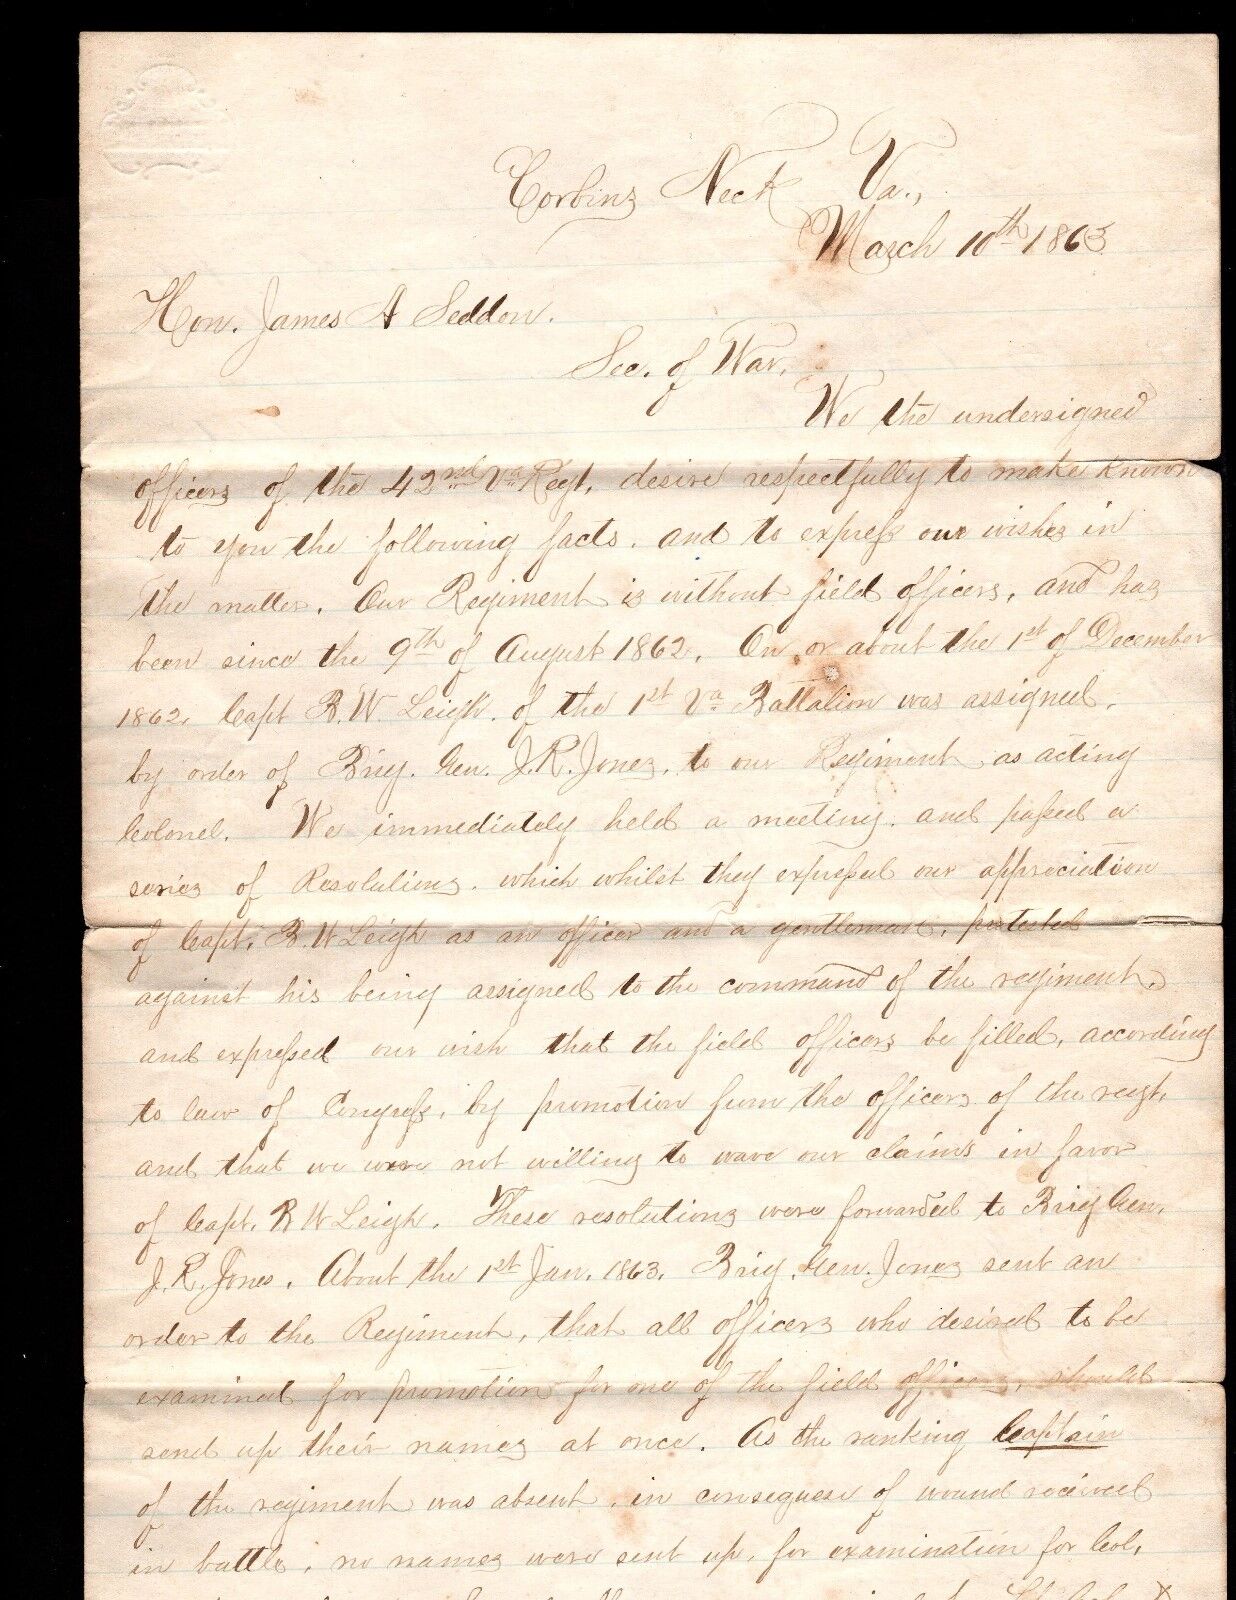 42nd Virginia Corbin's Neck 3/10/1863 Signed 25 Officers 2 Confederate Generals 